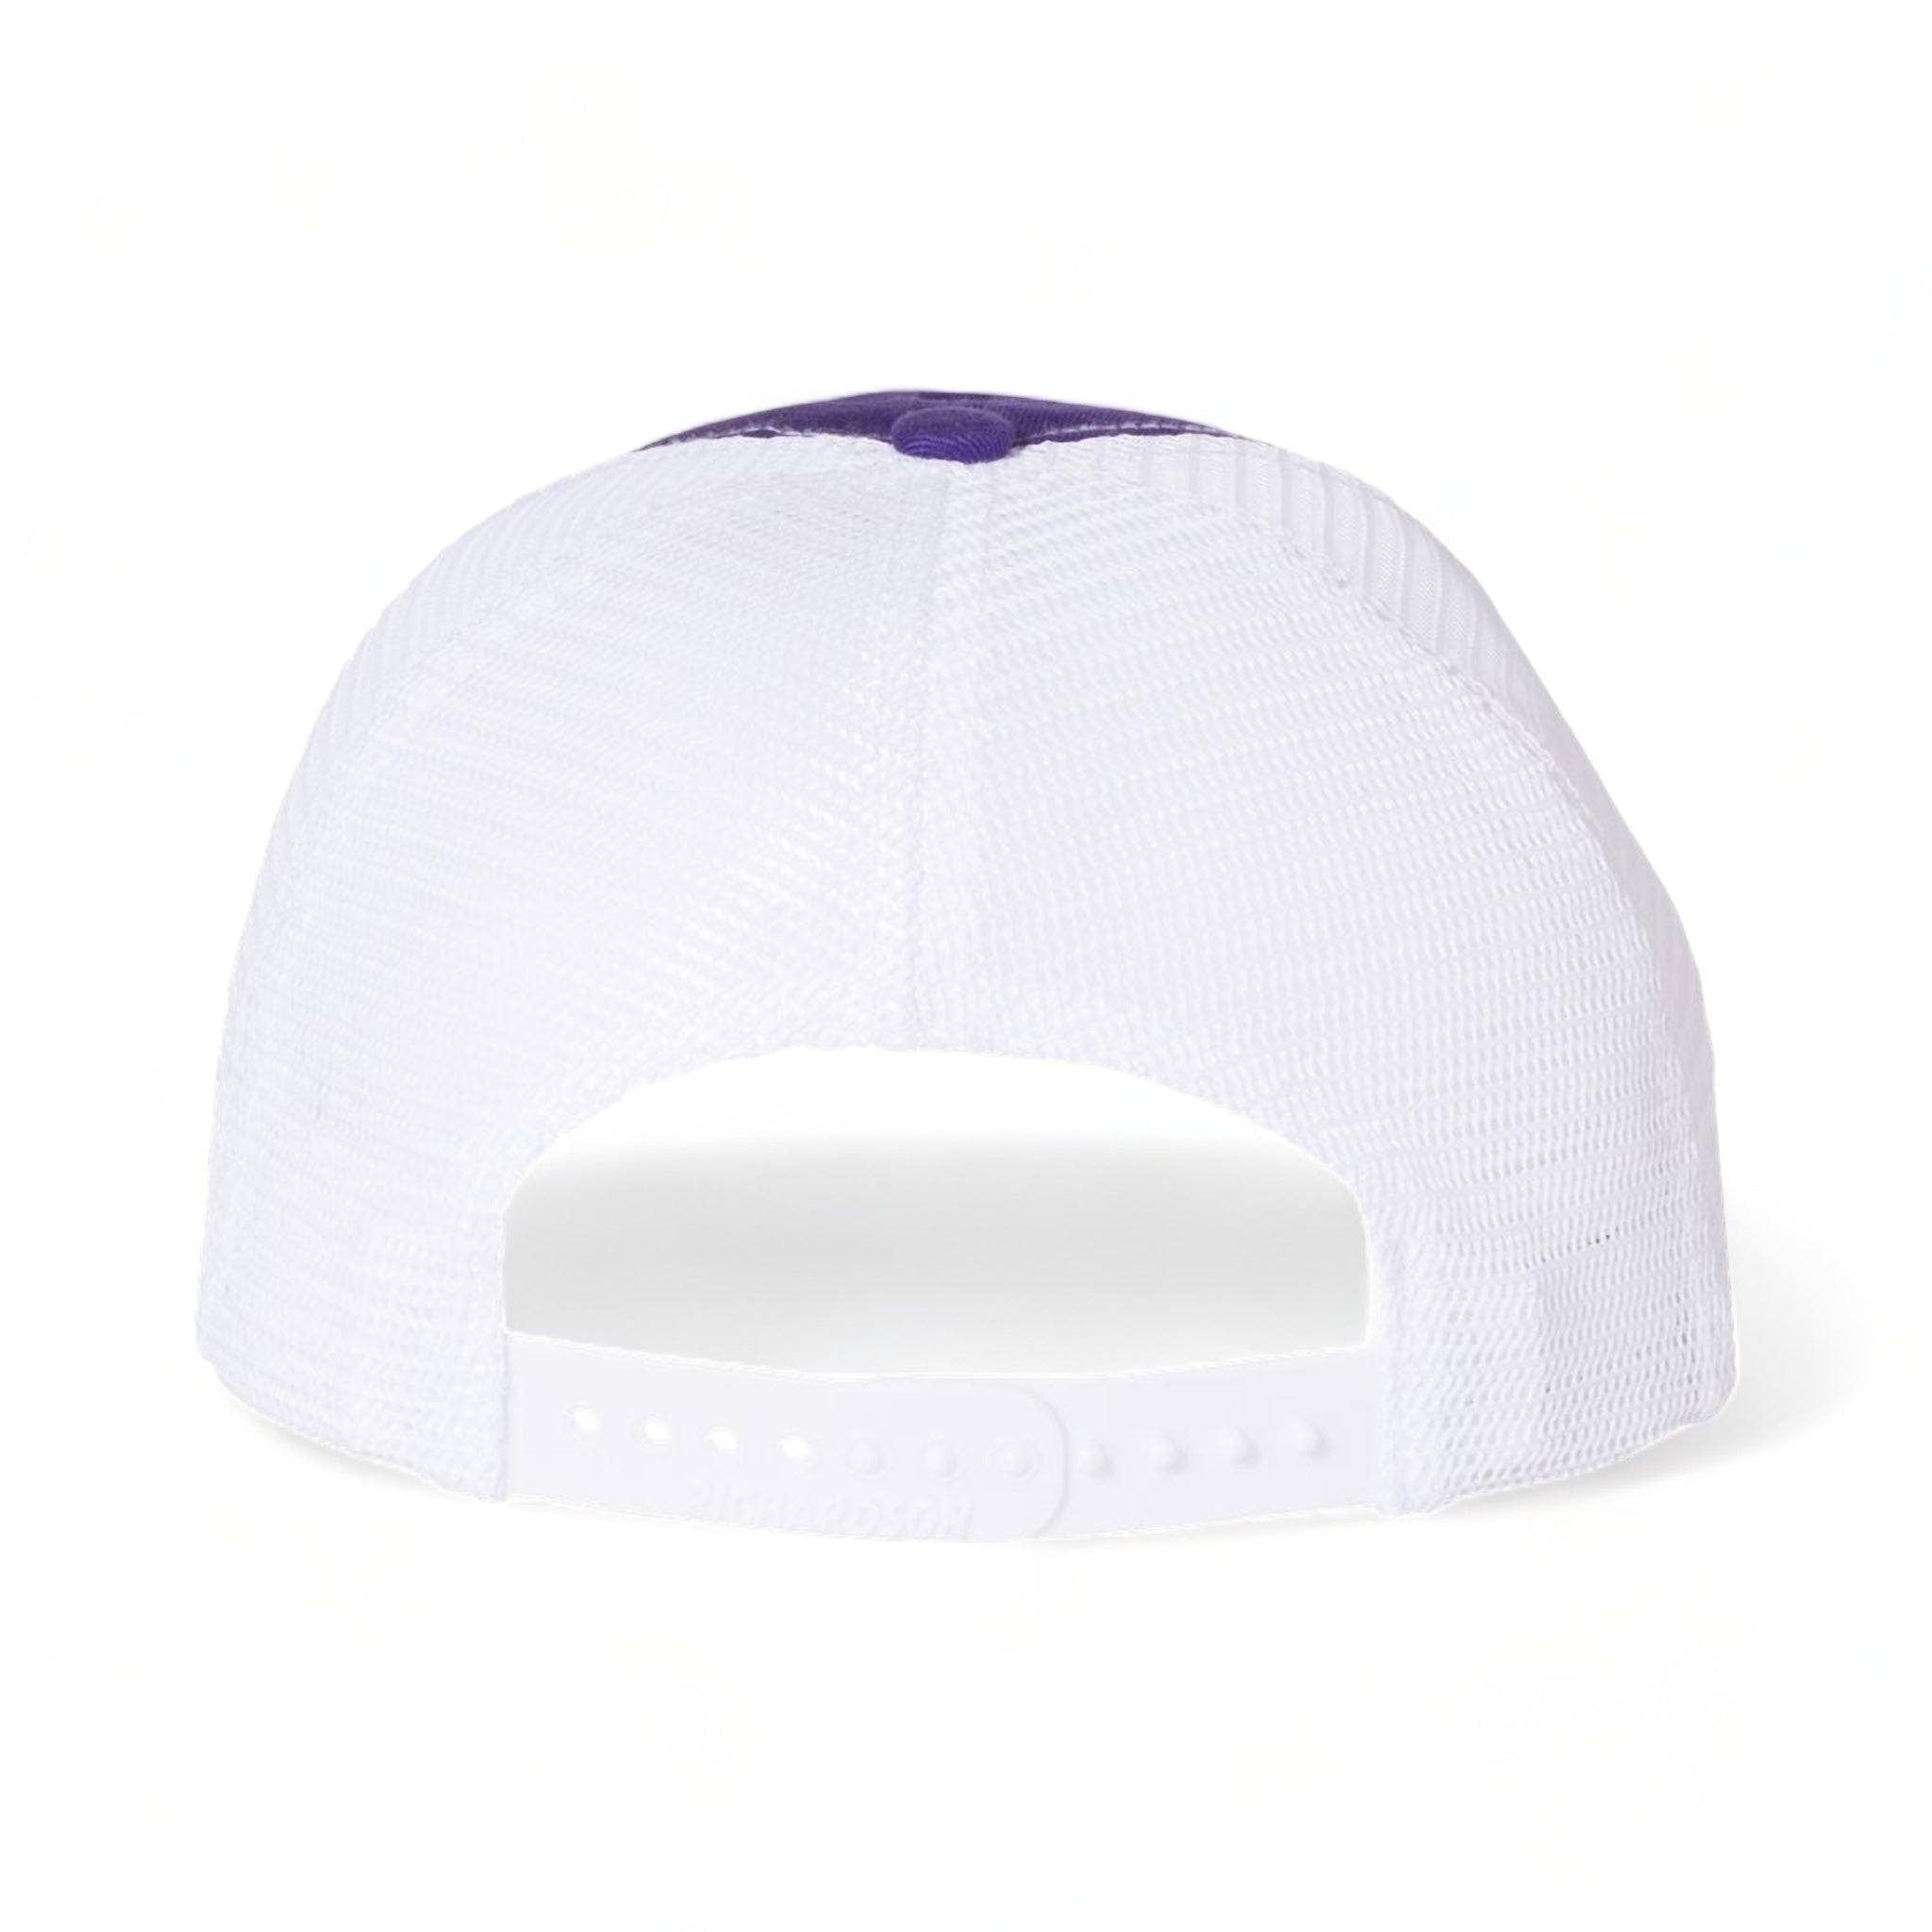 Back view of Richardson 111 custom hat in purple and white